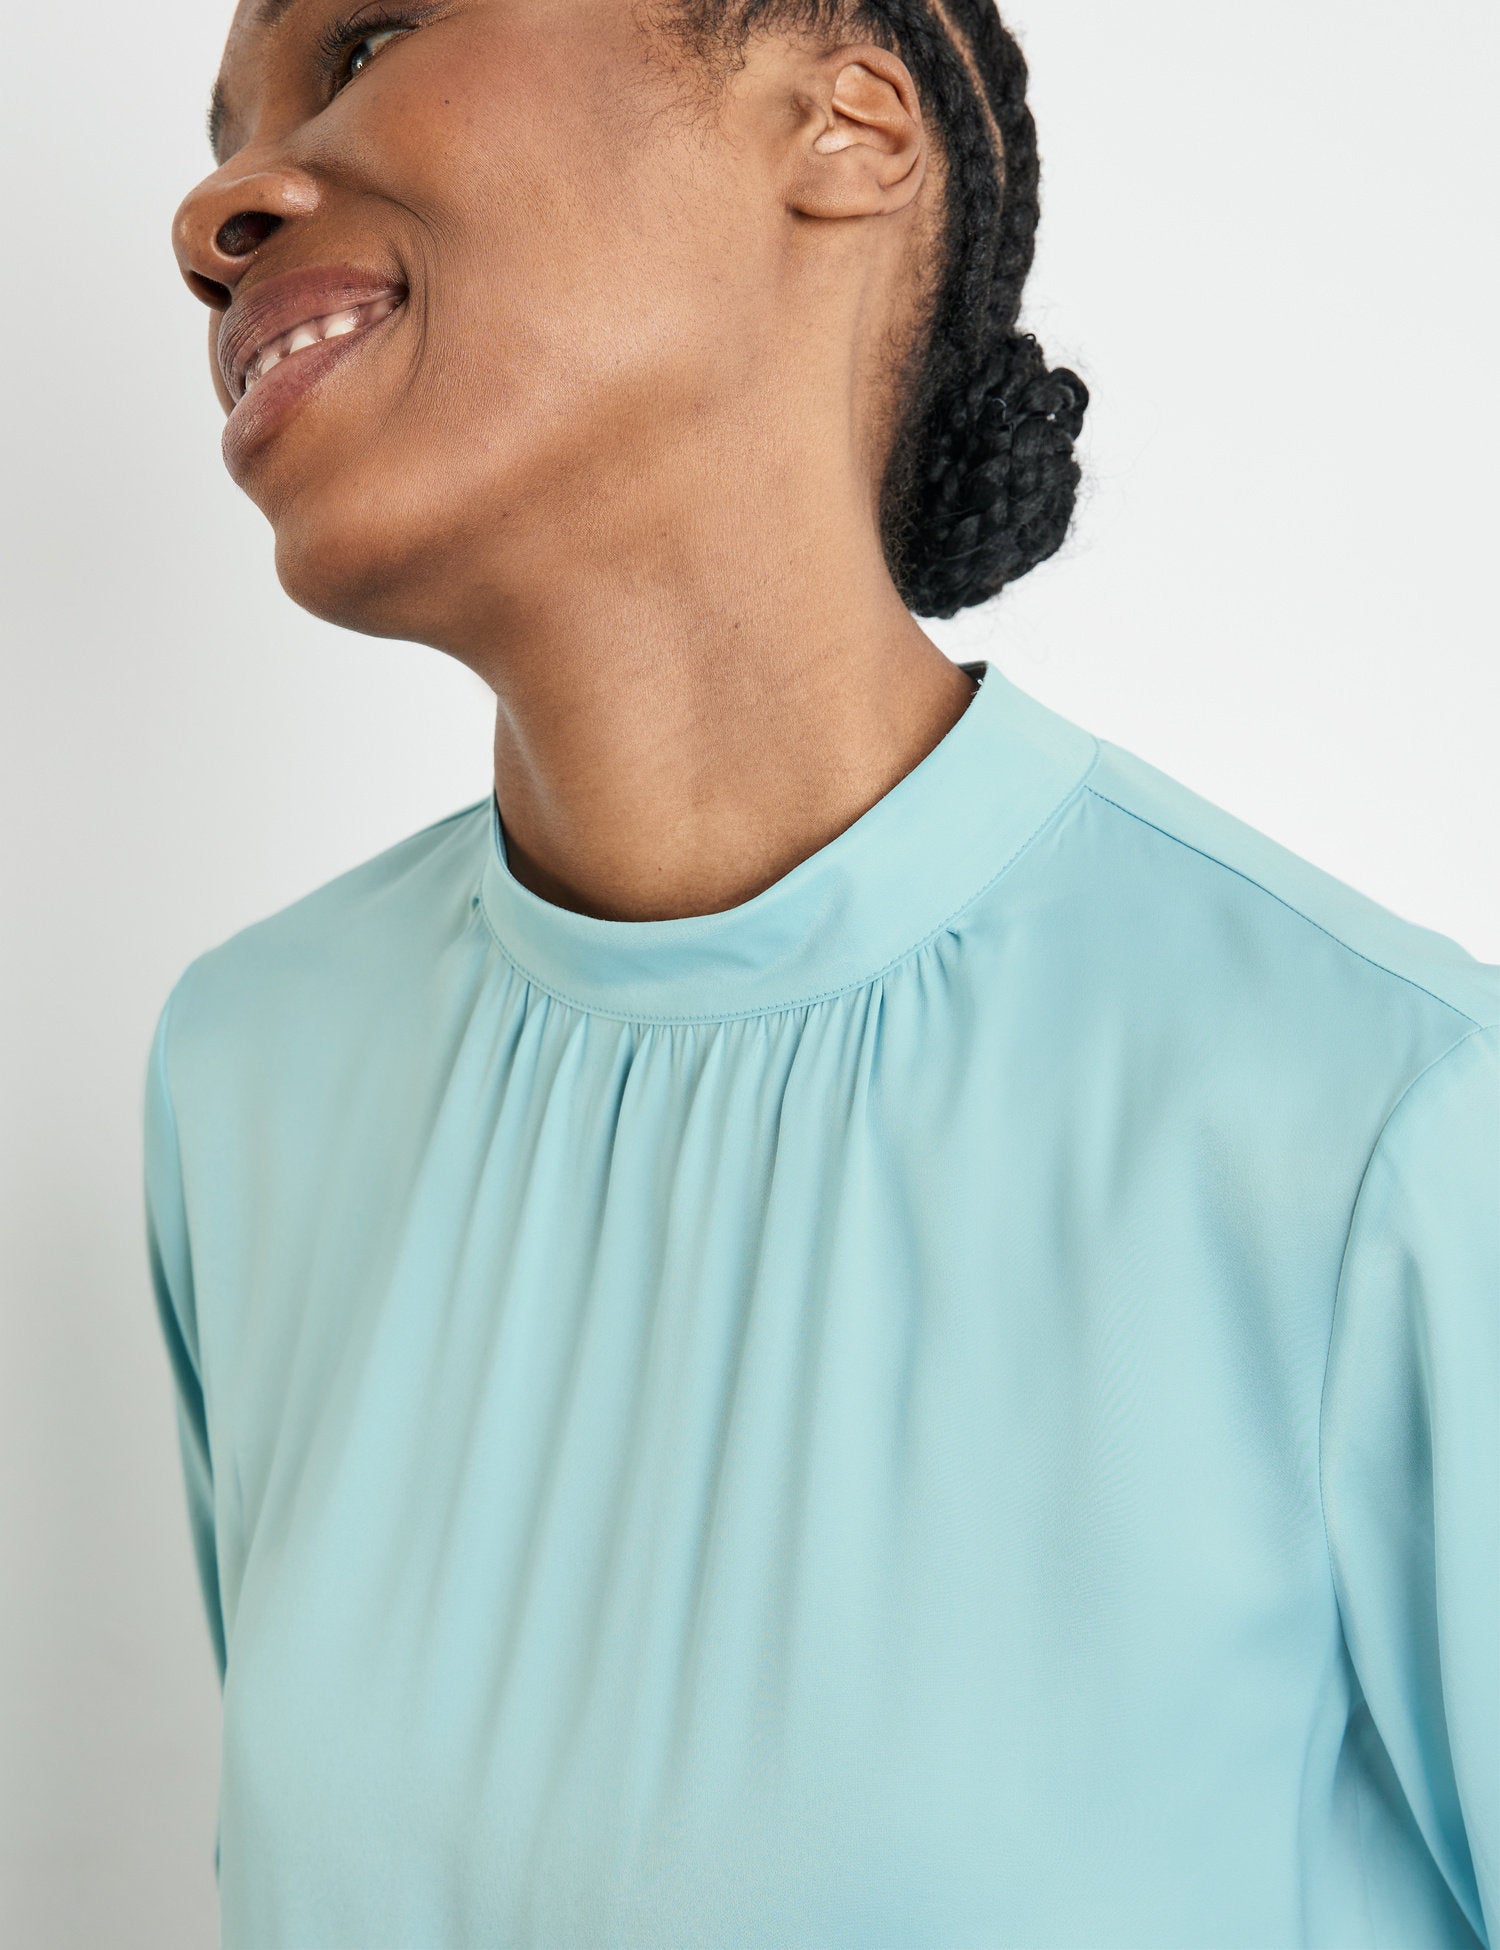 Flowing Blouse With A Stand-Up Collar_360067-31460_80938_04